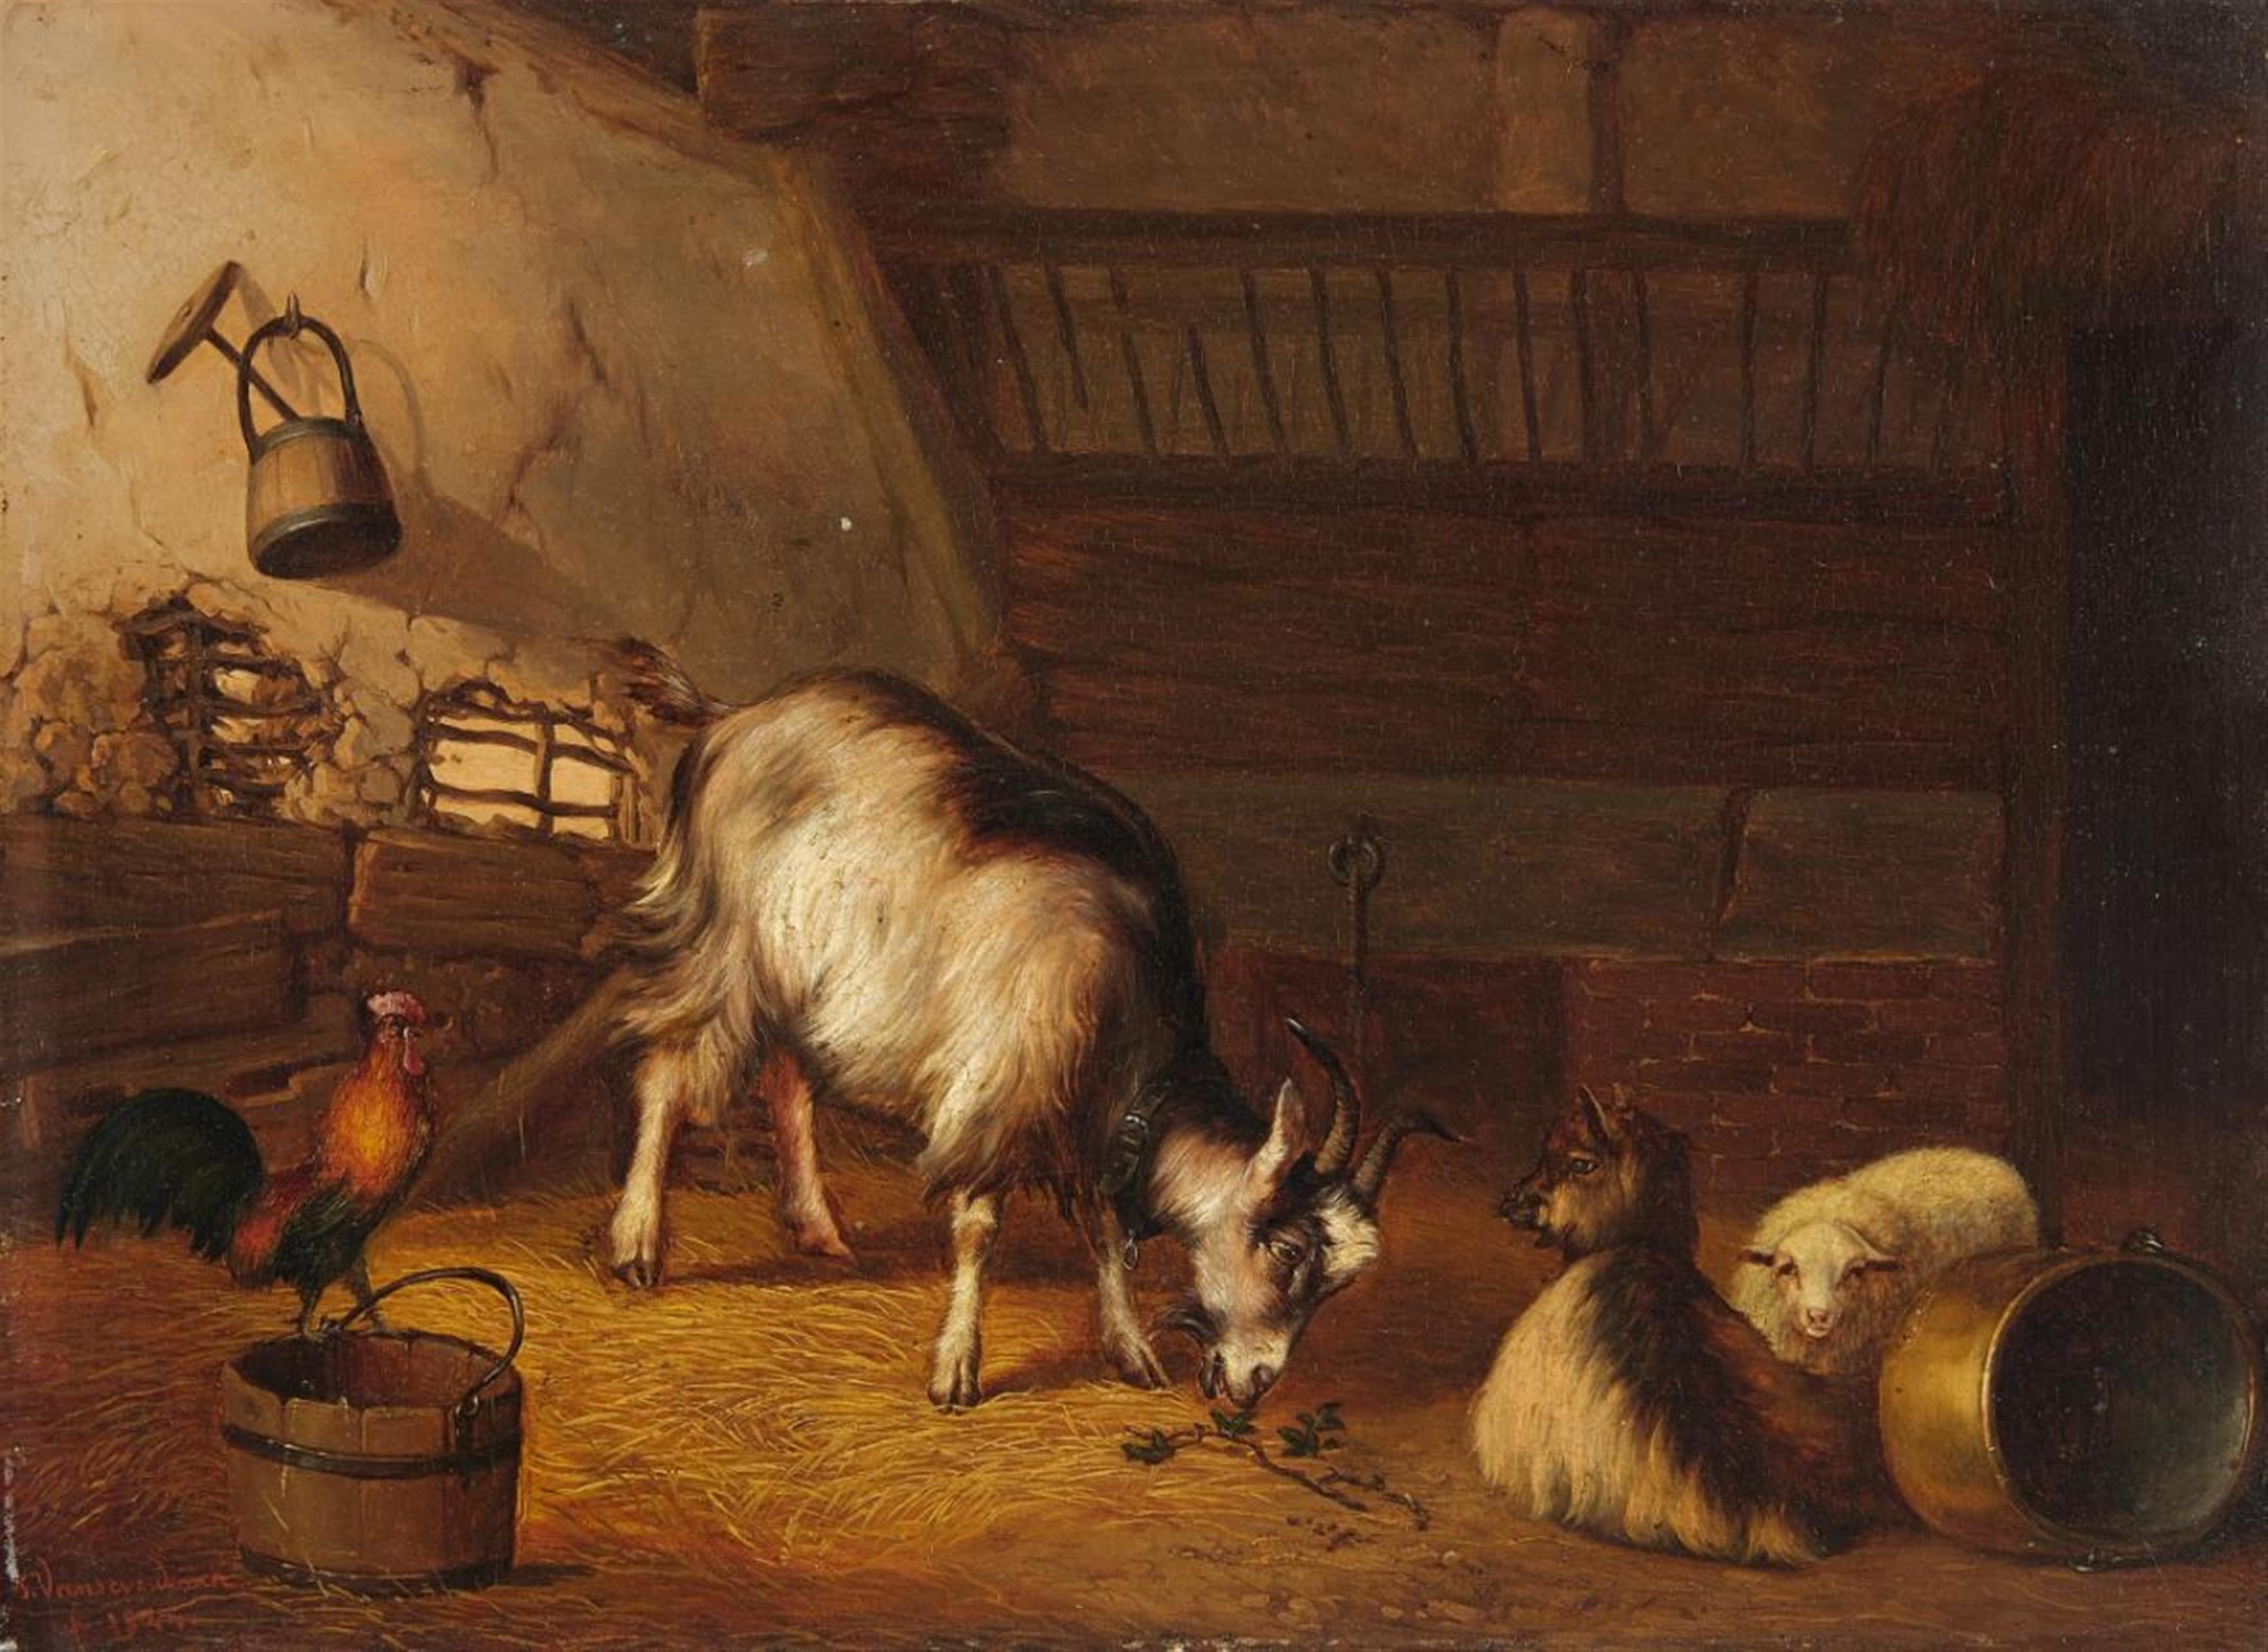 Frans van Severdonck - A Goat and Two Sheep in a Stable - image-1